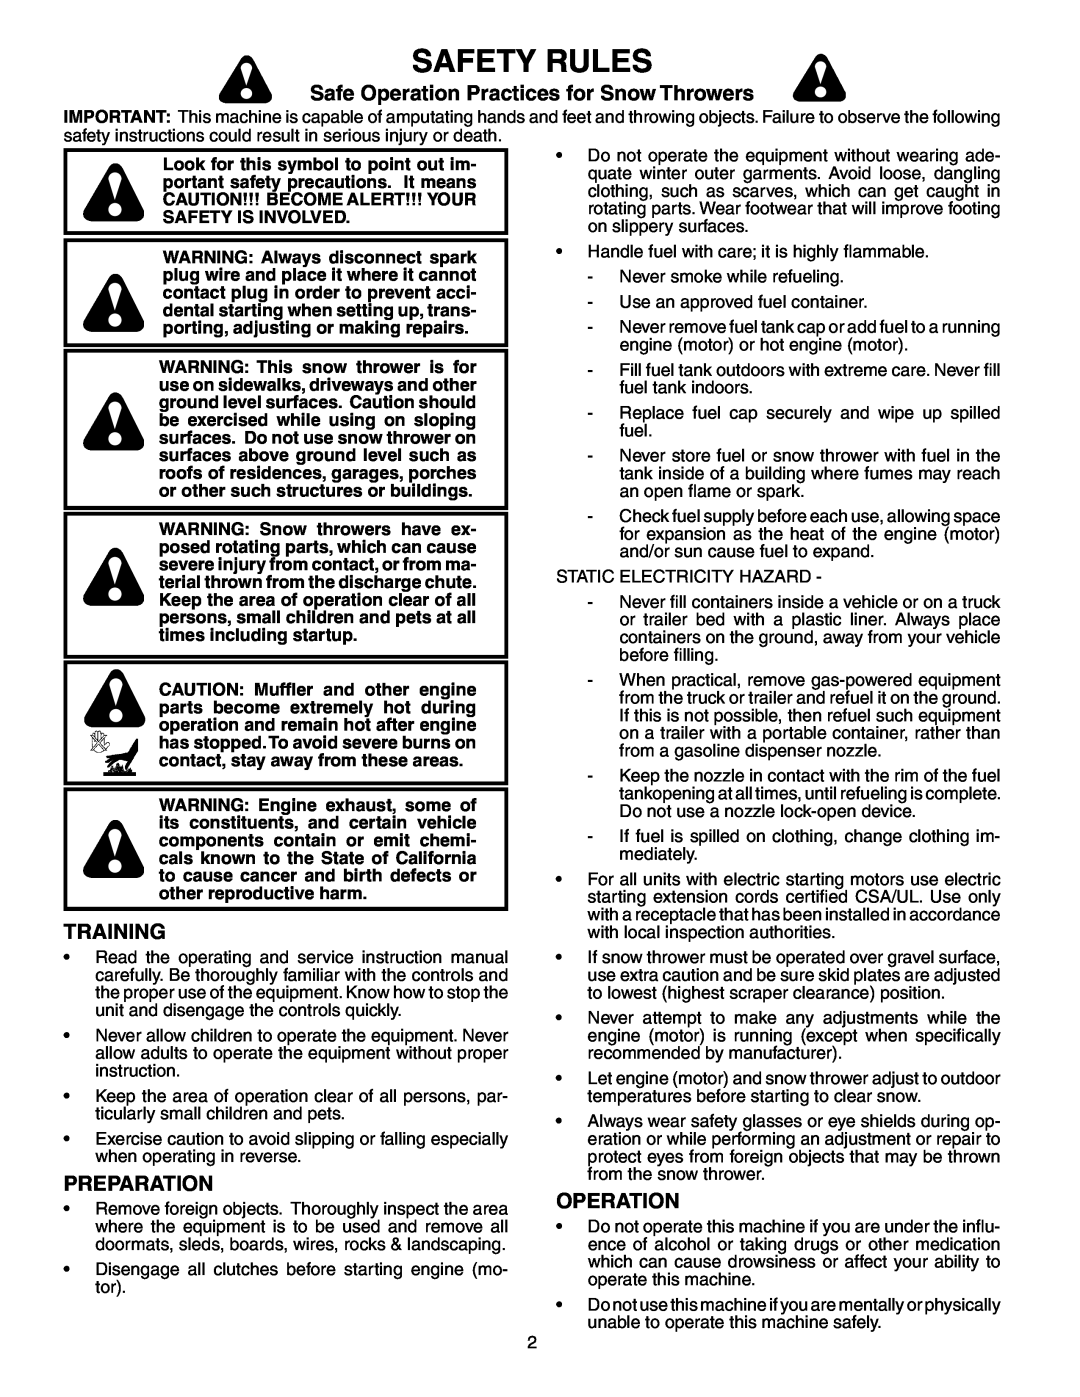 Poulan PR524ESA owner manual Safety Rules, Safe Operation Practices for Snow Throwers, Training, Preparation 